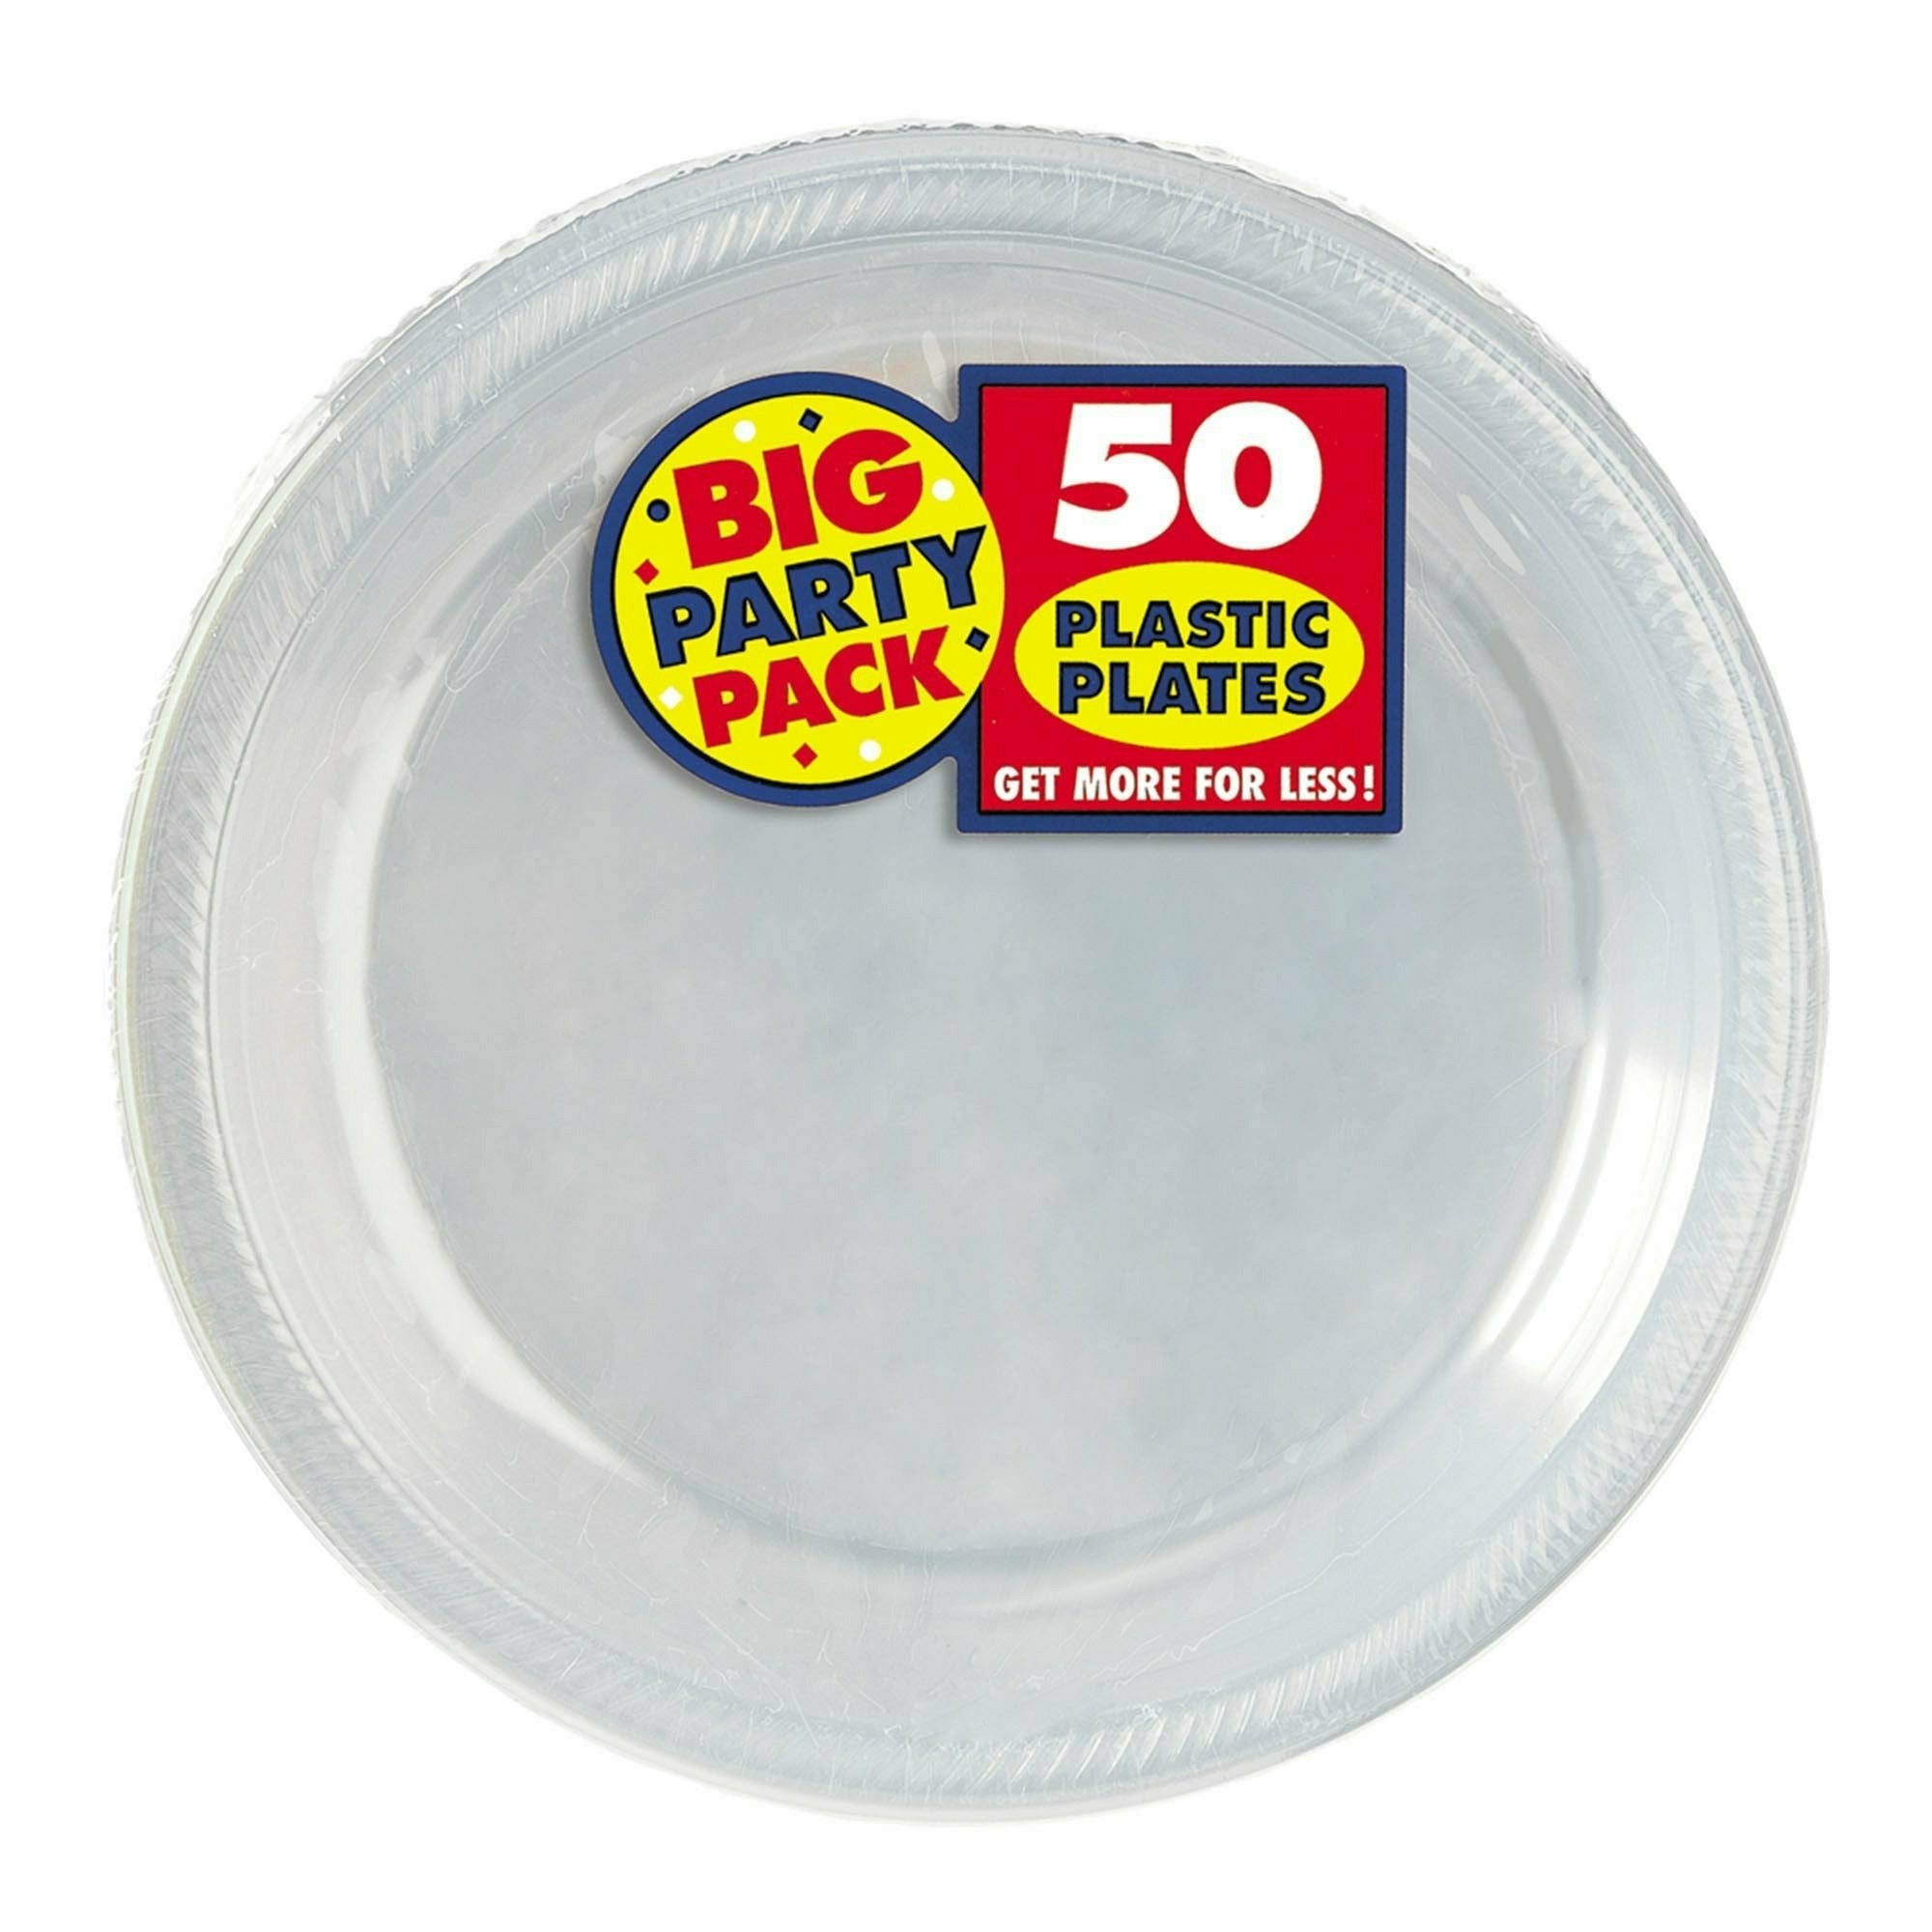 Amscan BASIC CLEAR 7 IN PLATES 50 CT